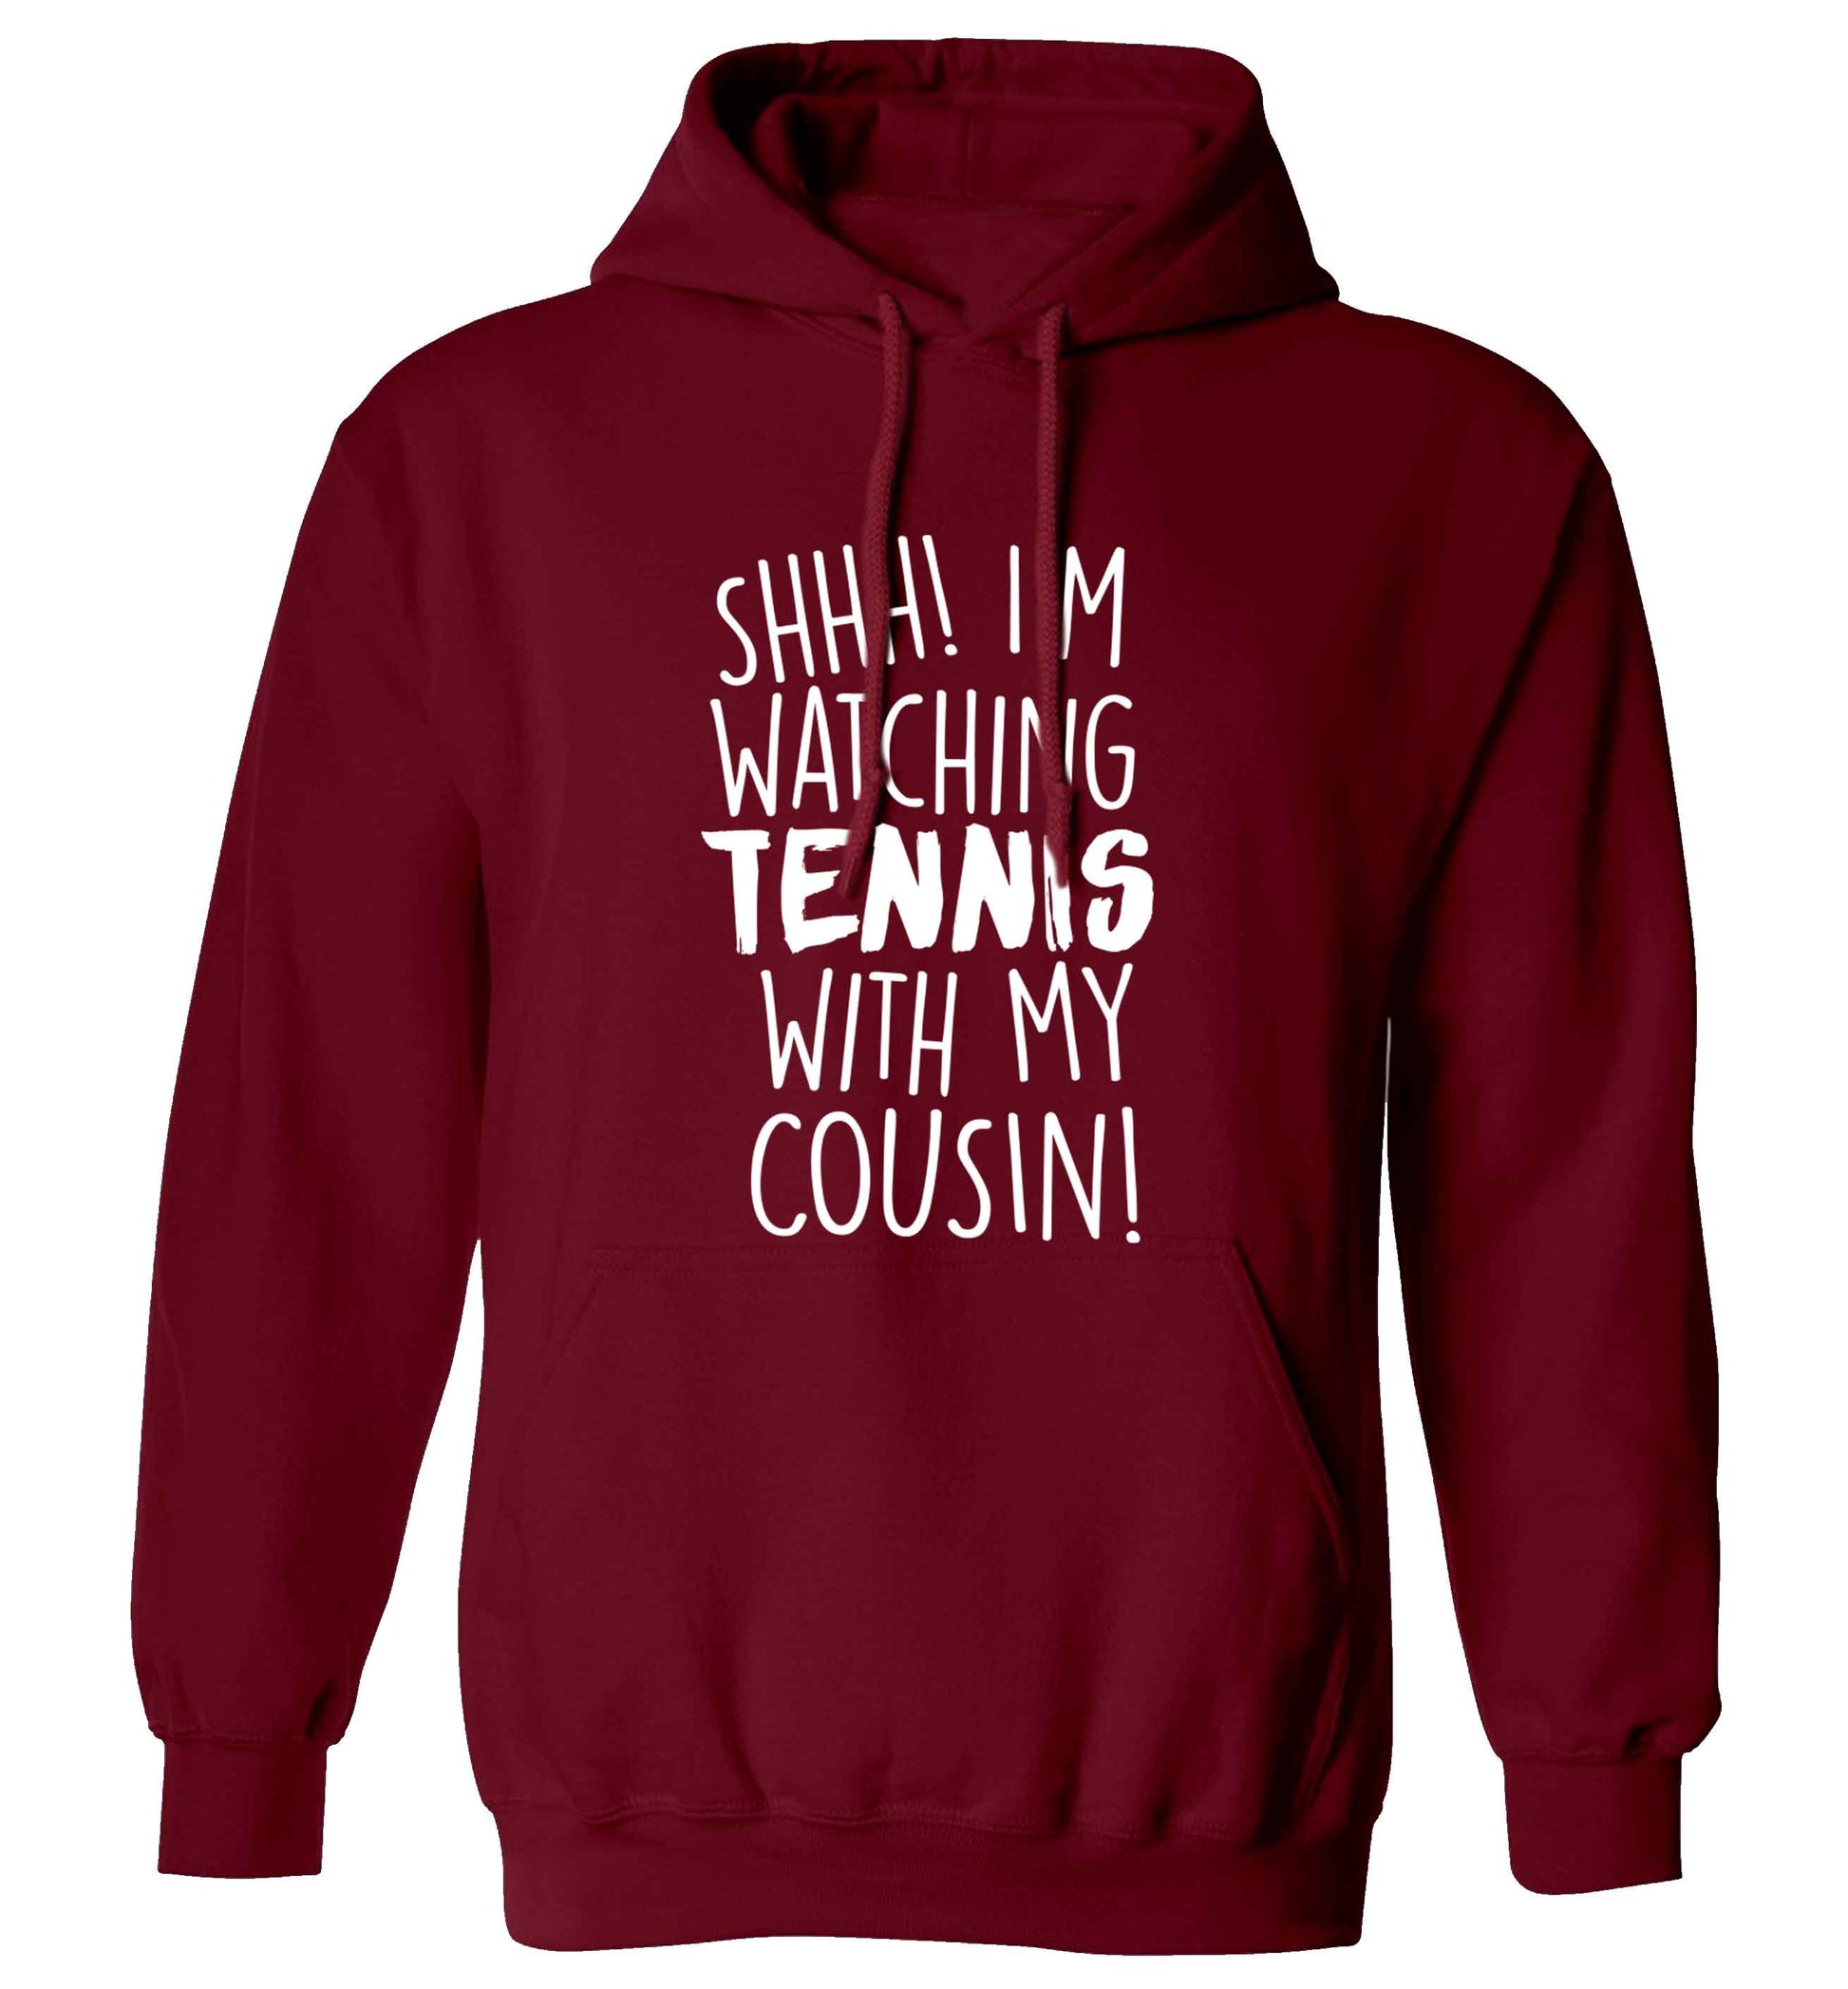 Shh! I'm watching tennis with my cousin! adults unisex maroon hoodie 2XL